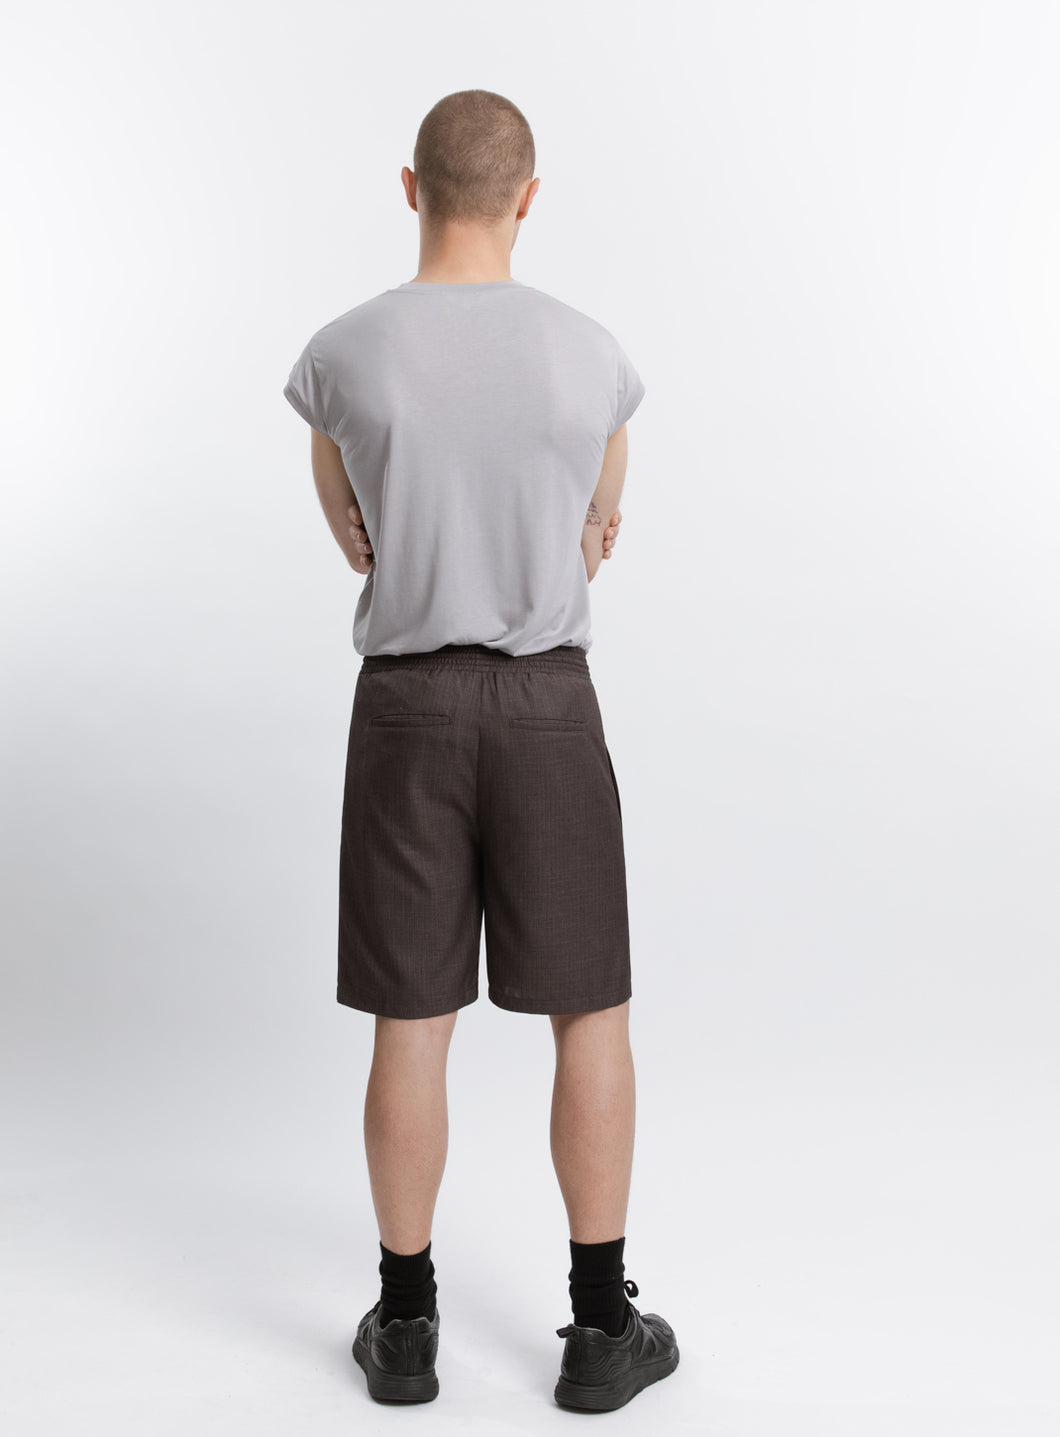 Baggy Bermuda Shorts in Light Chocolate End-on-End